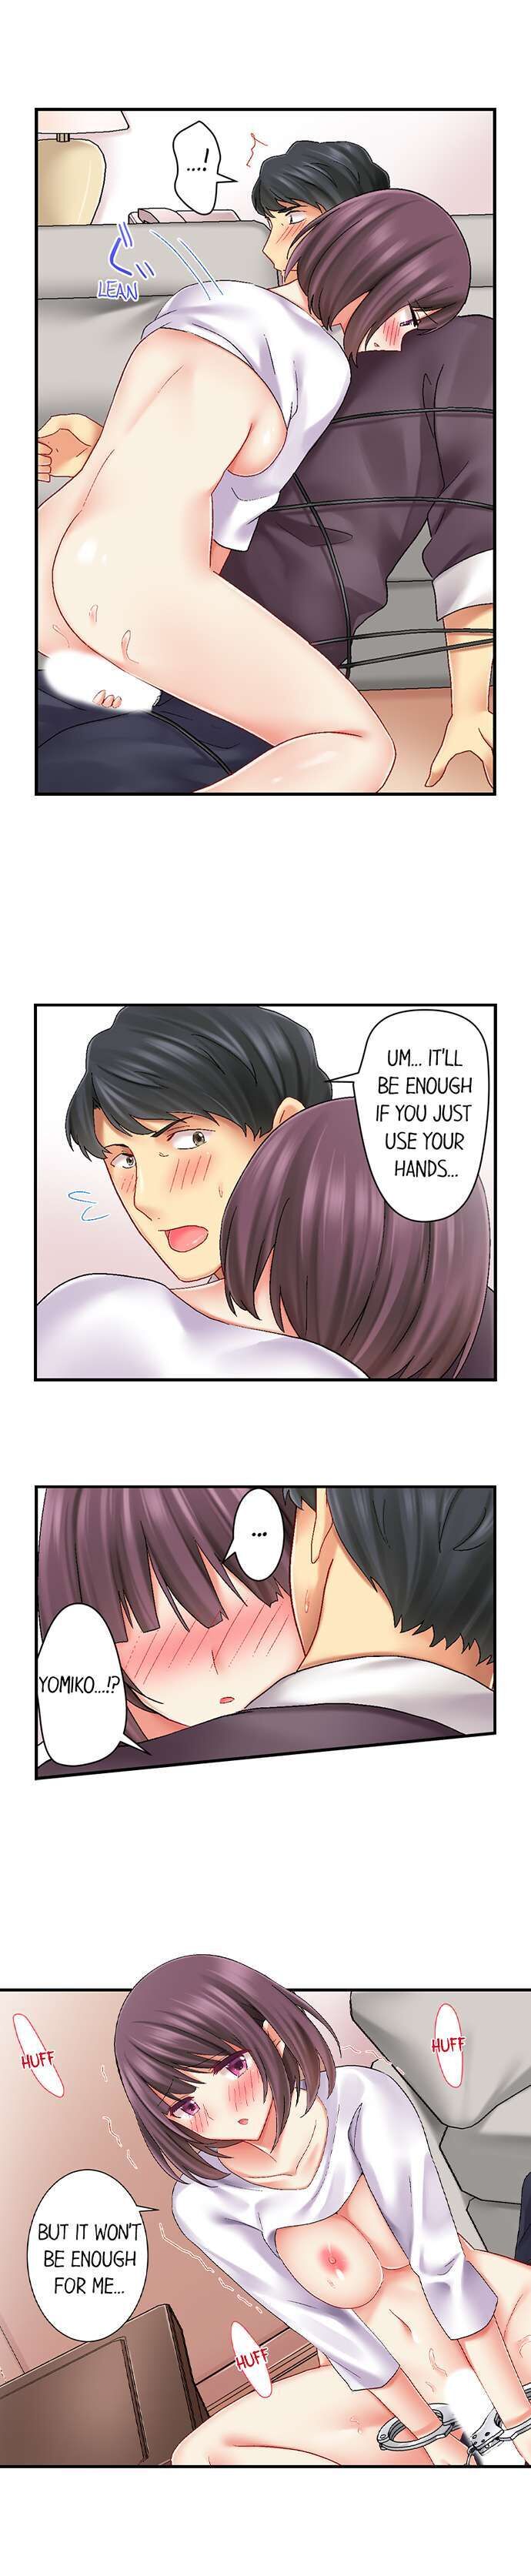 Our Kinky Newlywed Life - Chapter 21 Page 2